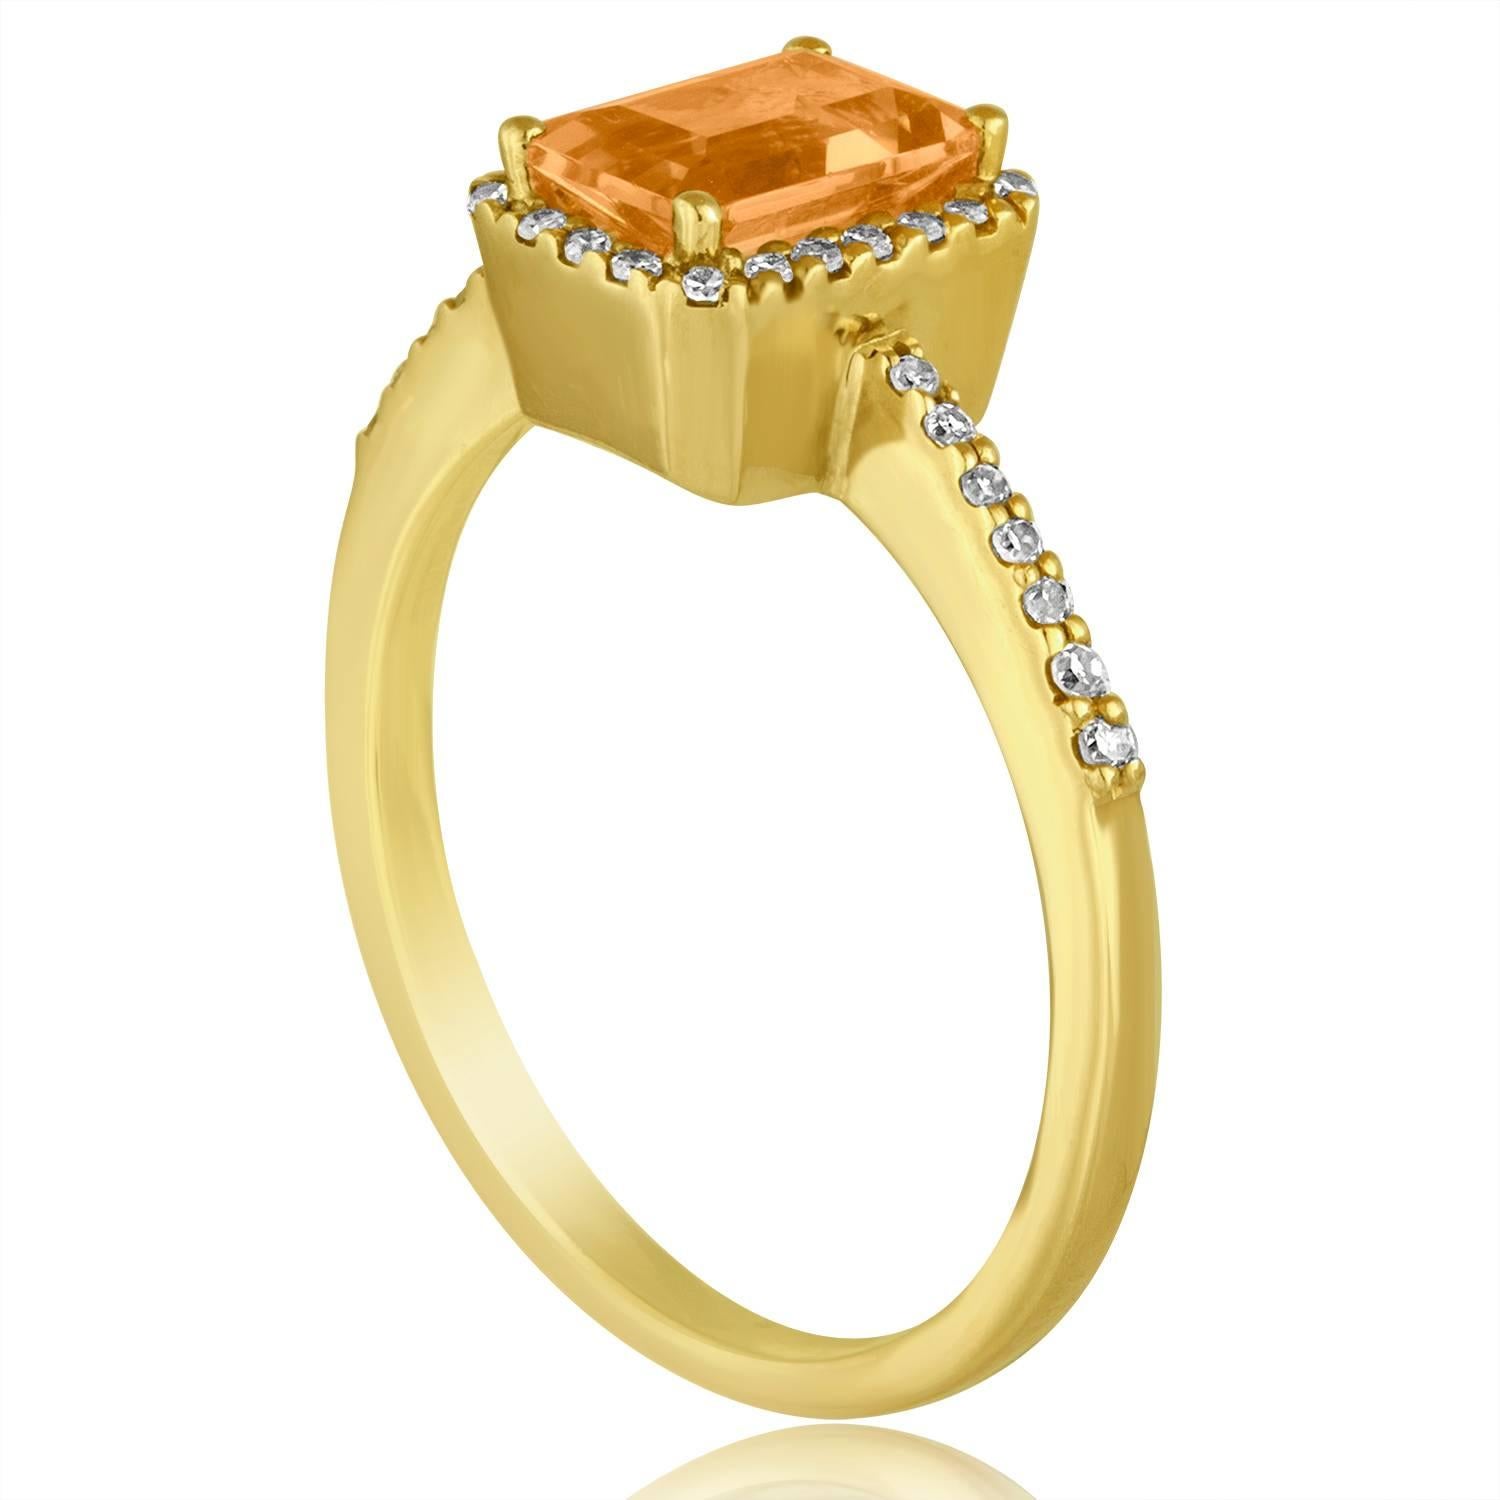 Stunning Step Cut Citrine Ring
The ring is 14K Yellow Gold
There are 0.14 Carats In Diamonds H SI
The Center Stone is a Step Cut Citrine 0.81 Carat
The top measures 1/4